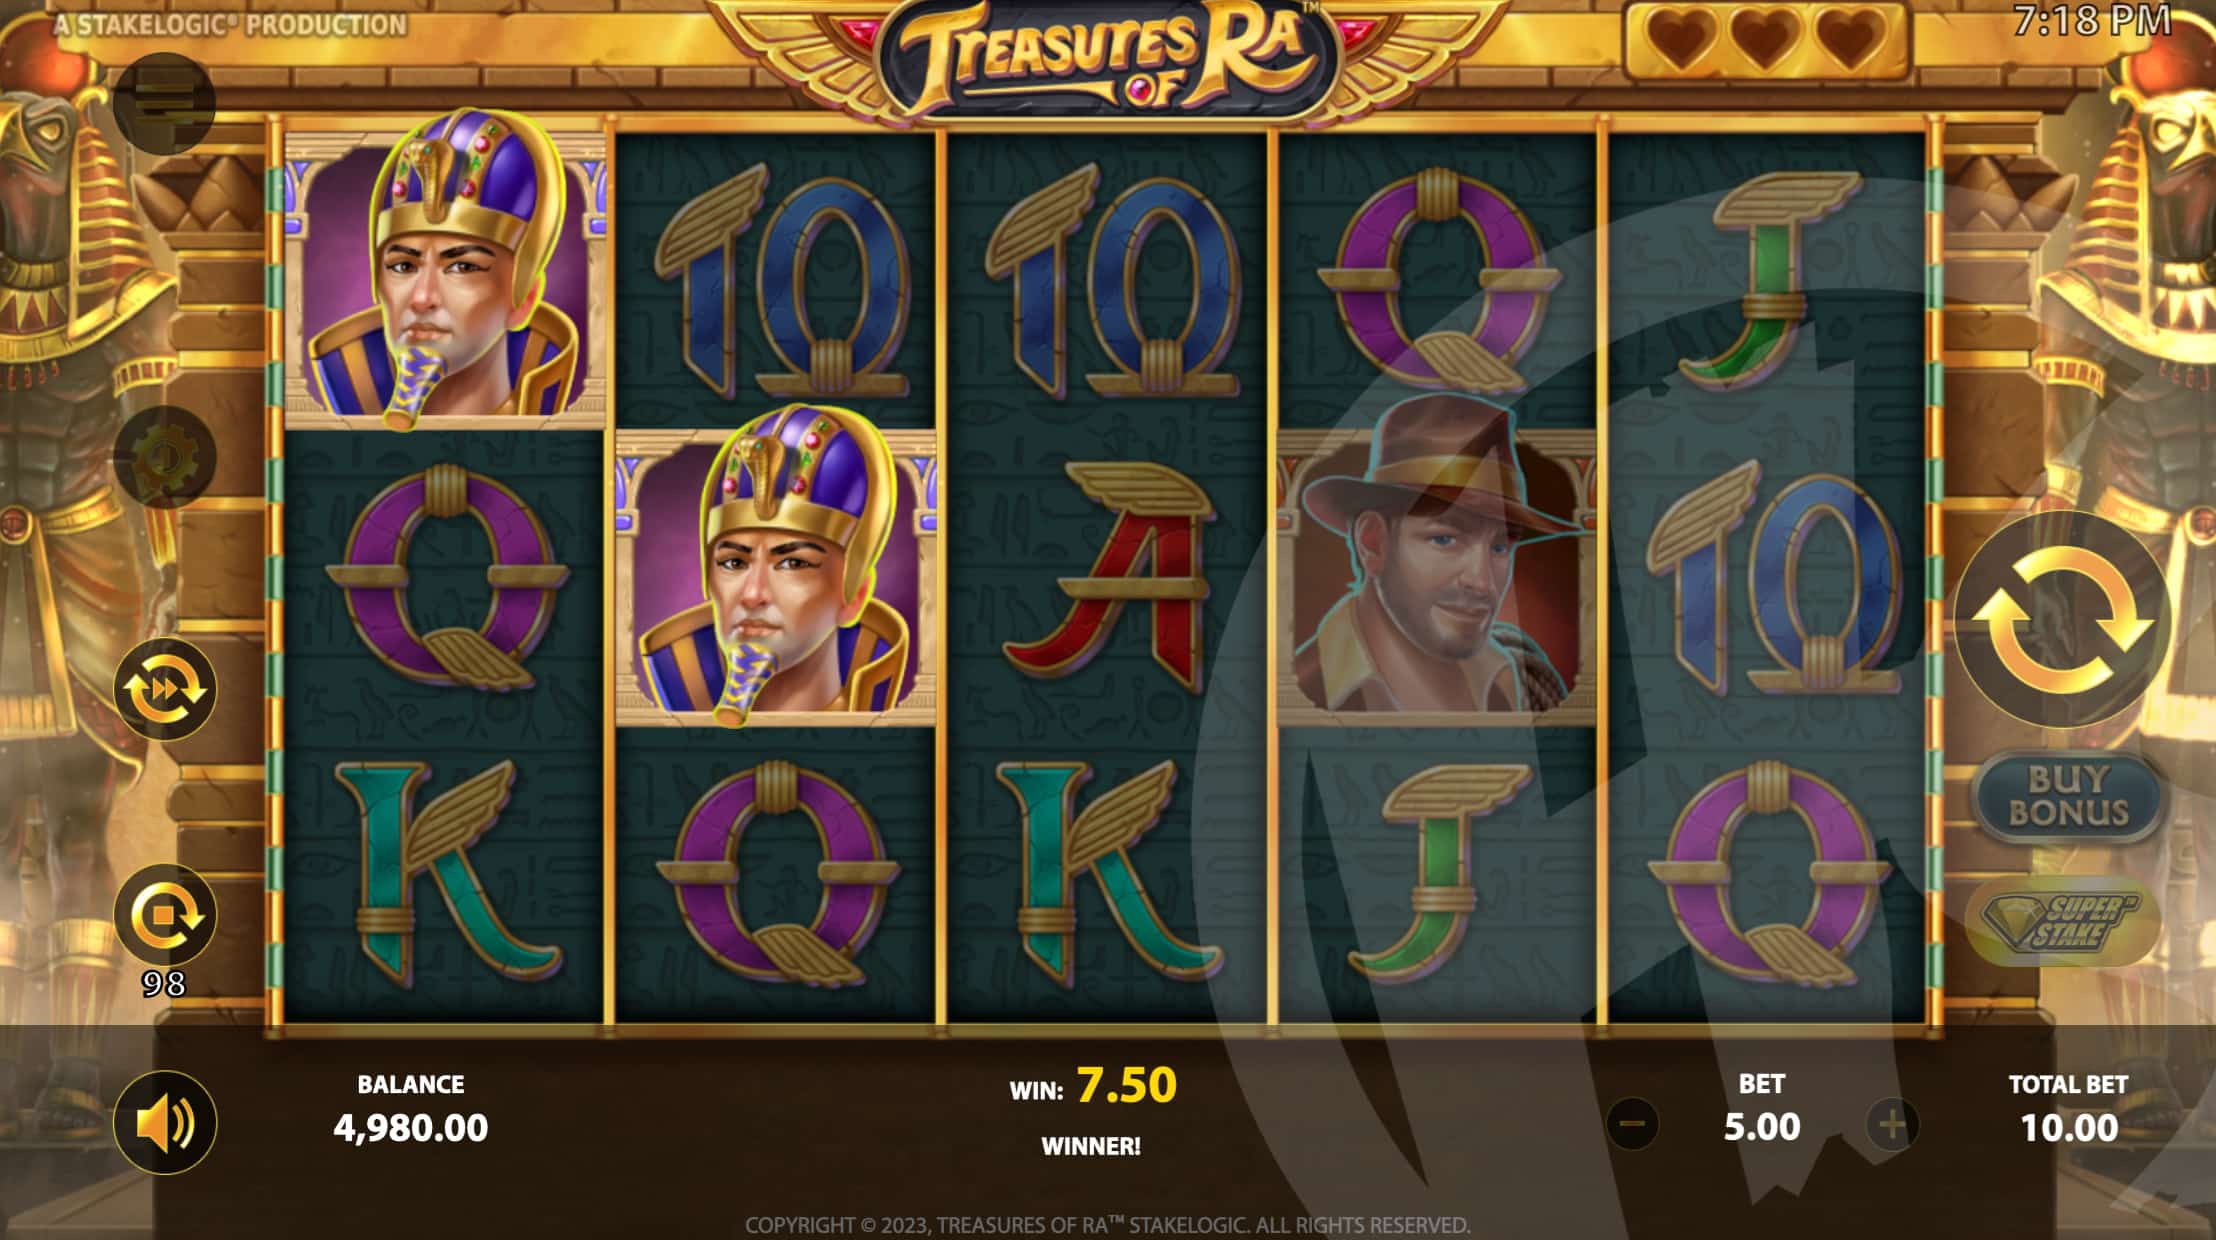 Treasures of Ra Offers Players 10 Fixed Win Lines